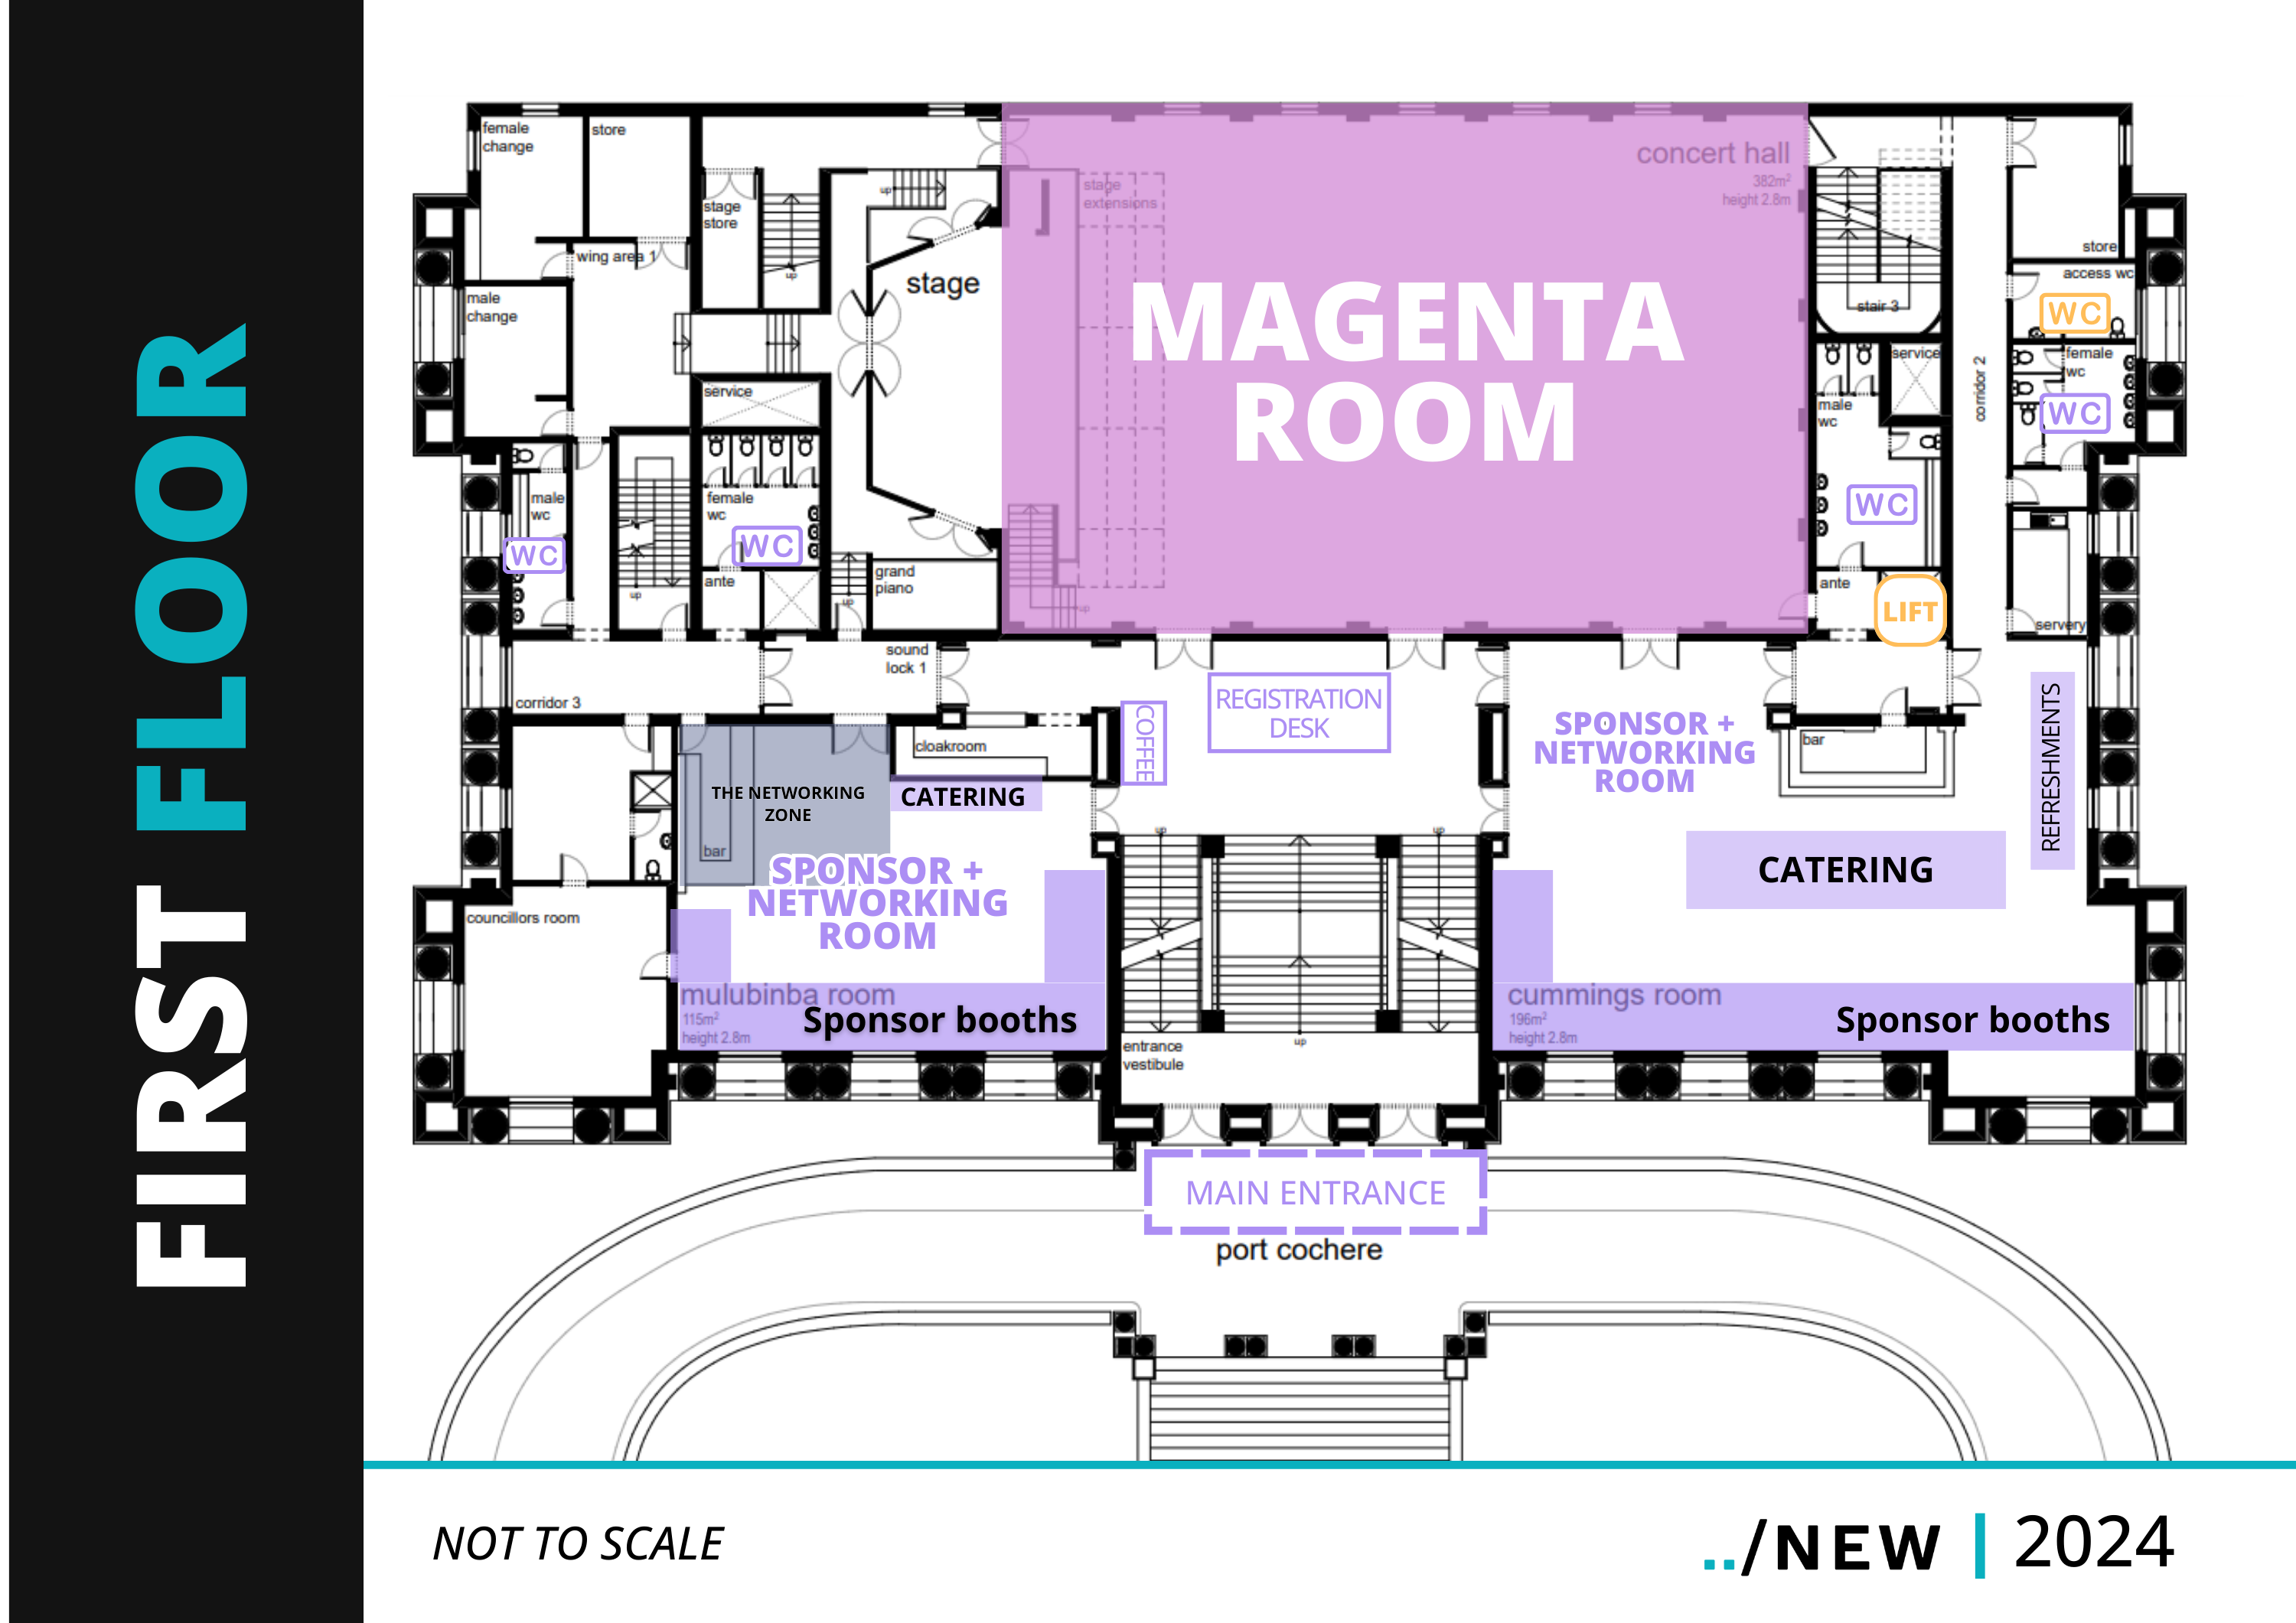 First floor map of the venue